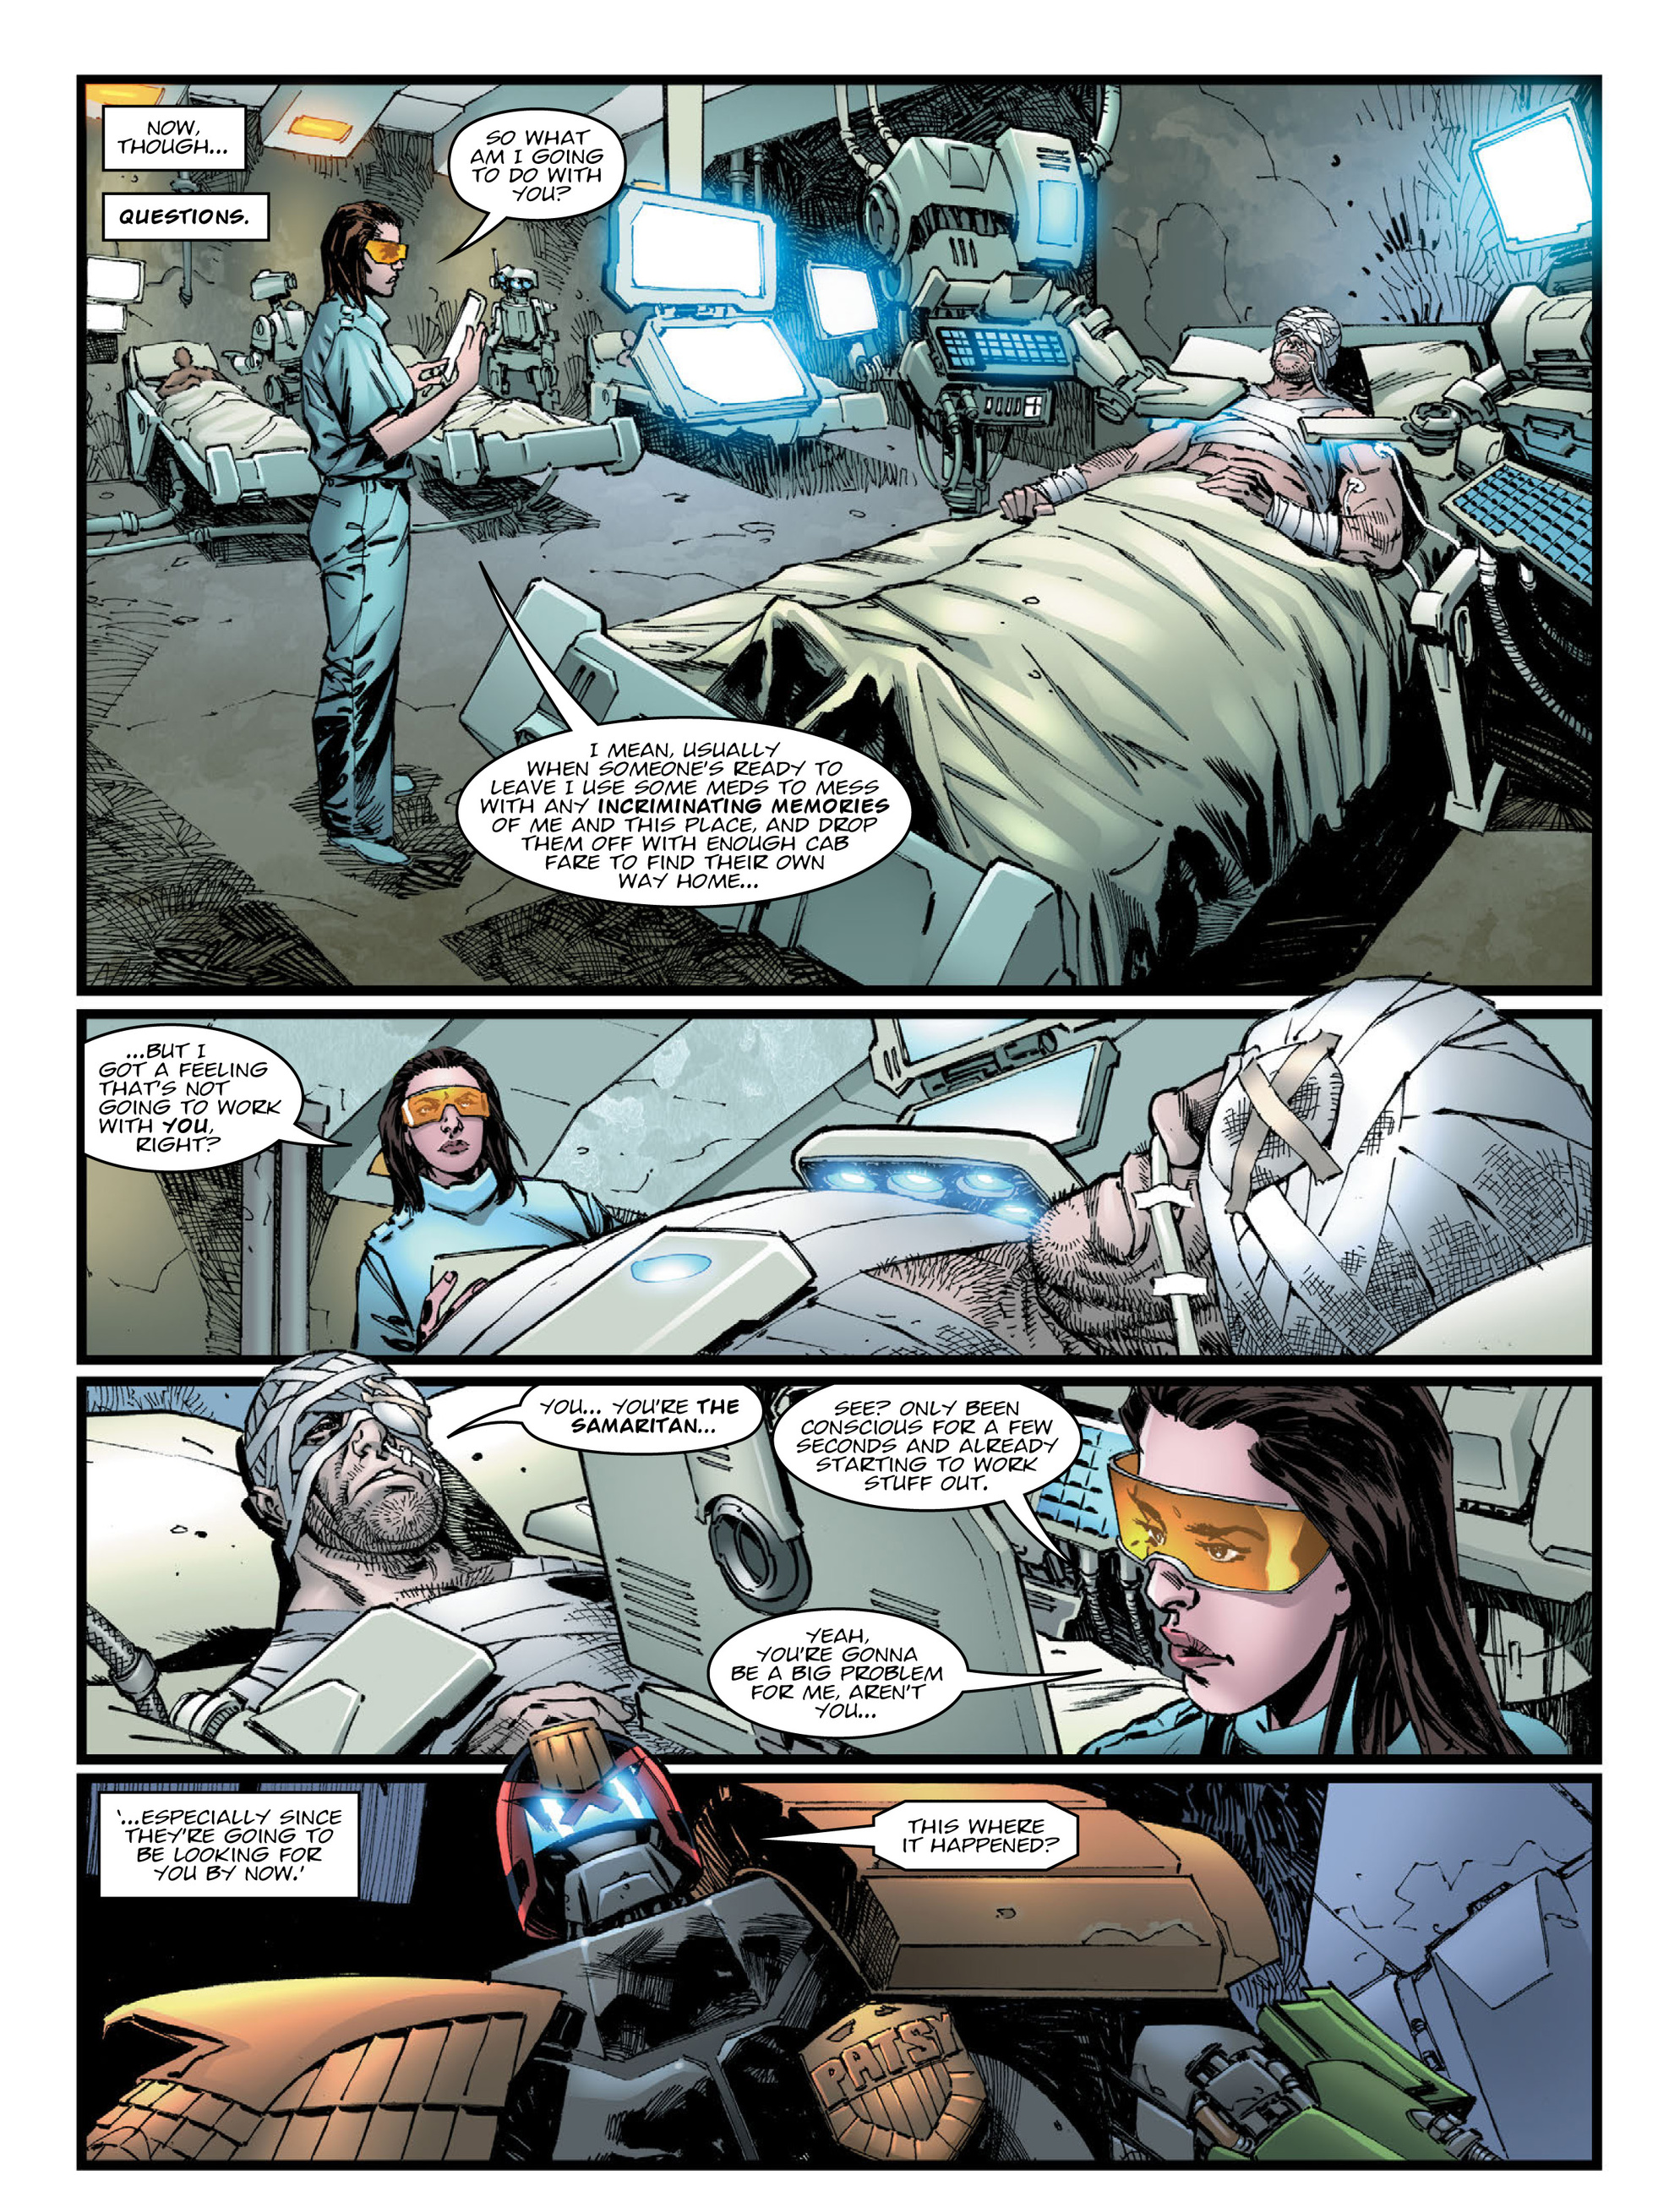 2000 AD: Chapter 2137 - Page 4